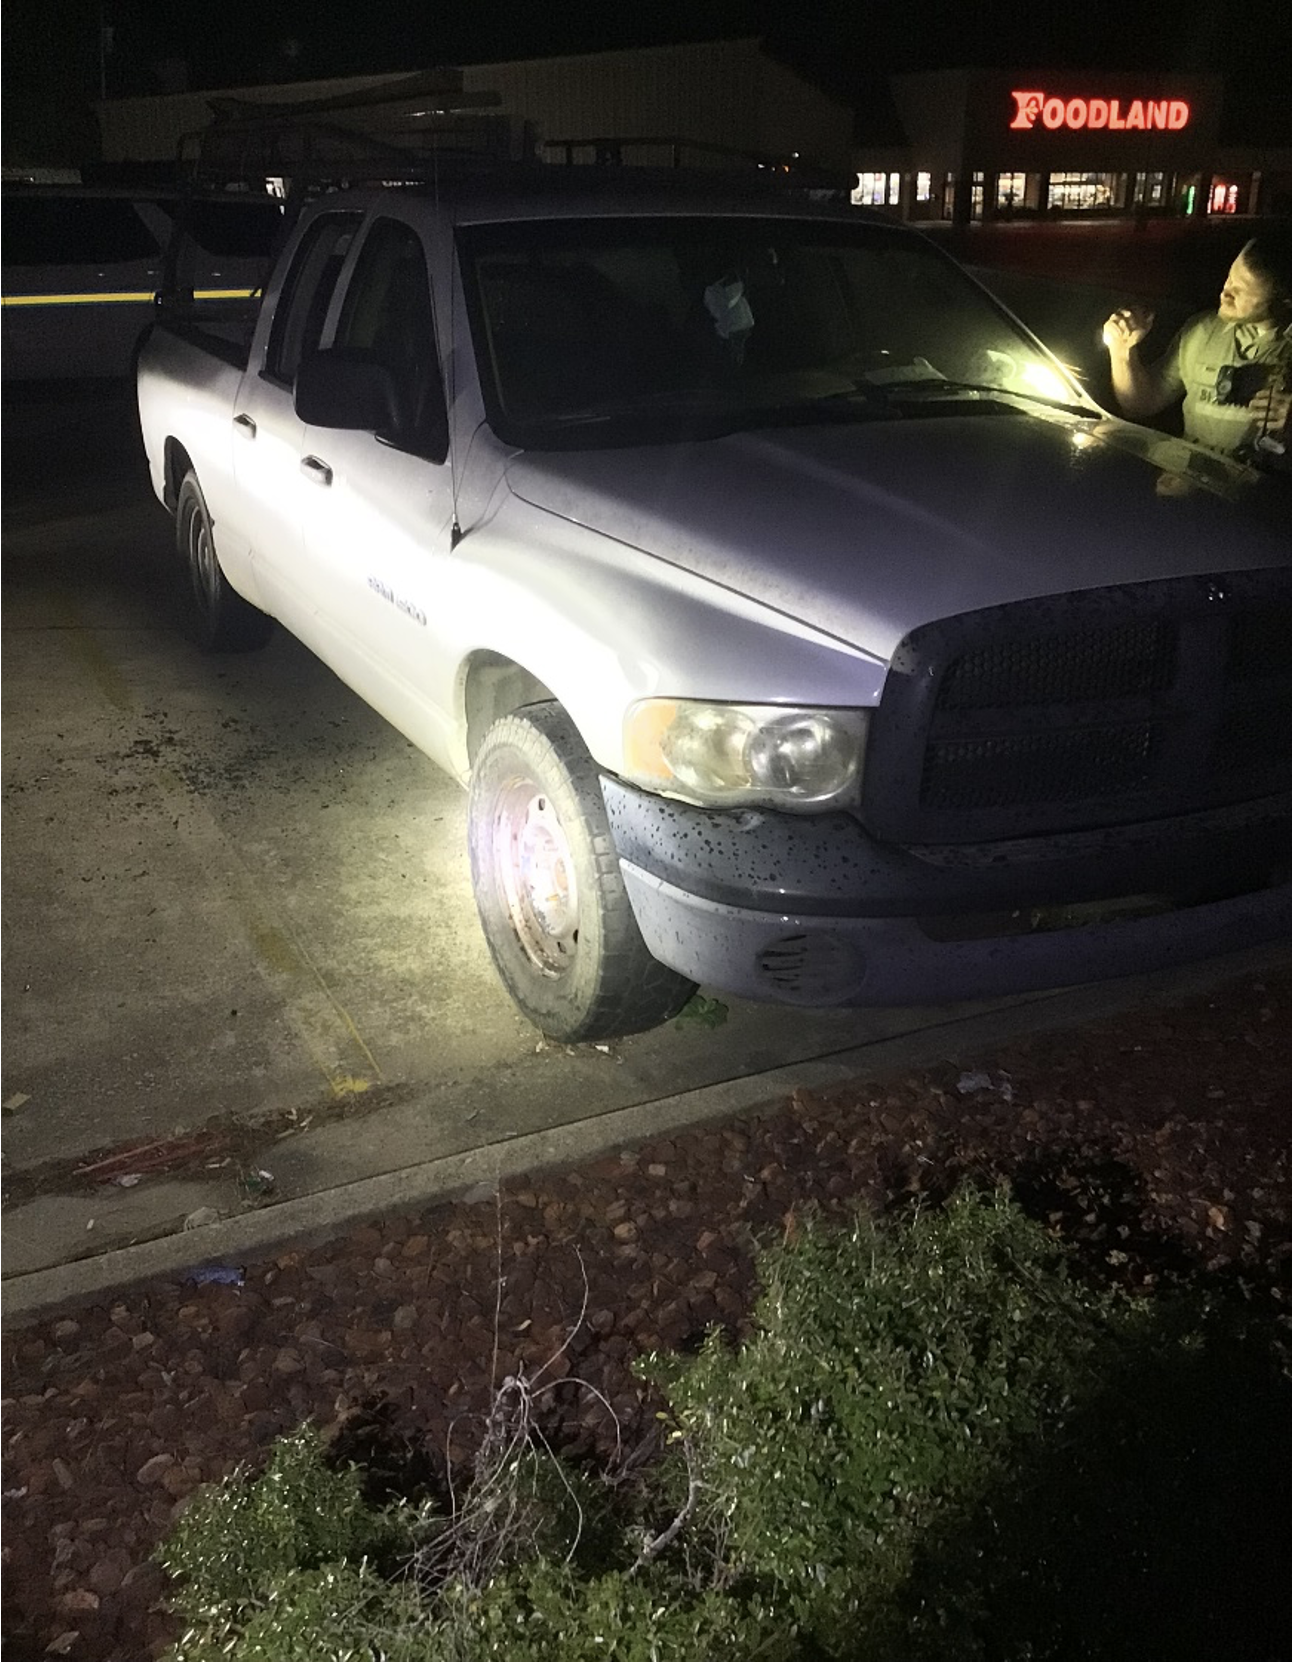 On November 20, 2023, a white Dodge Ram was broken into while in the parking lot of Foodland in Alexandria. The passenger side windows were broken, and the tool box was pried open. (2311-0290) PHOTO 23110290